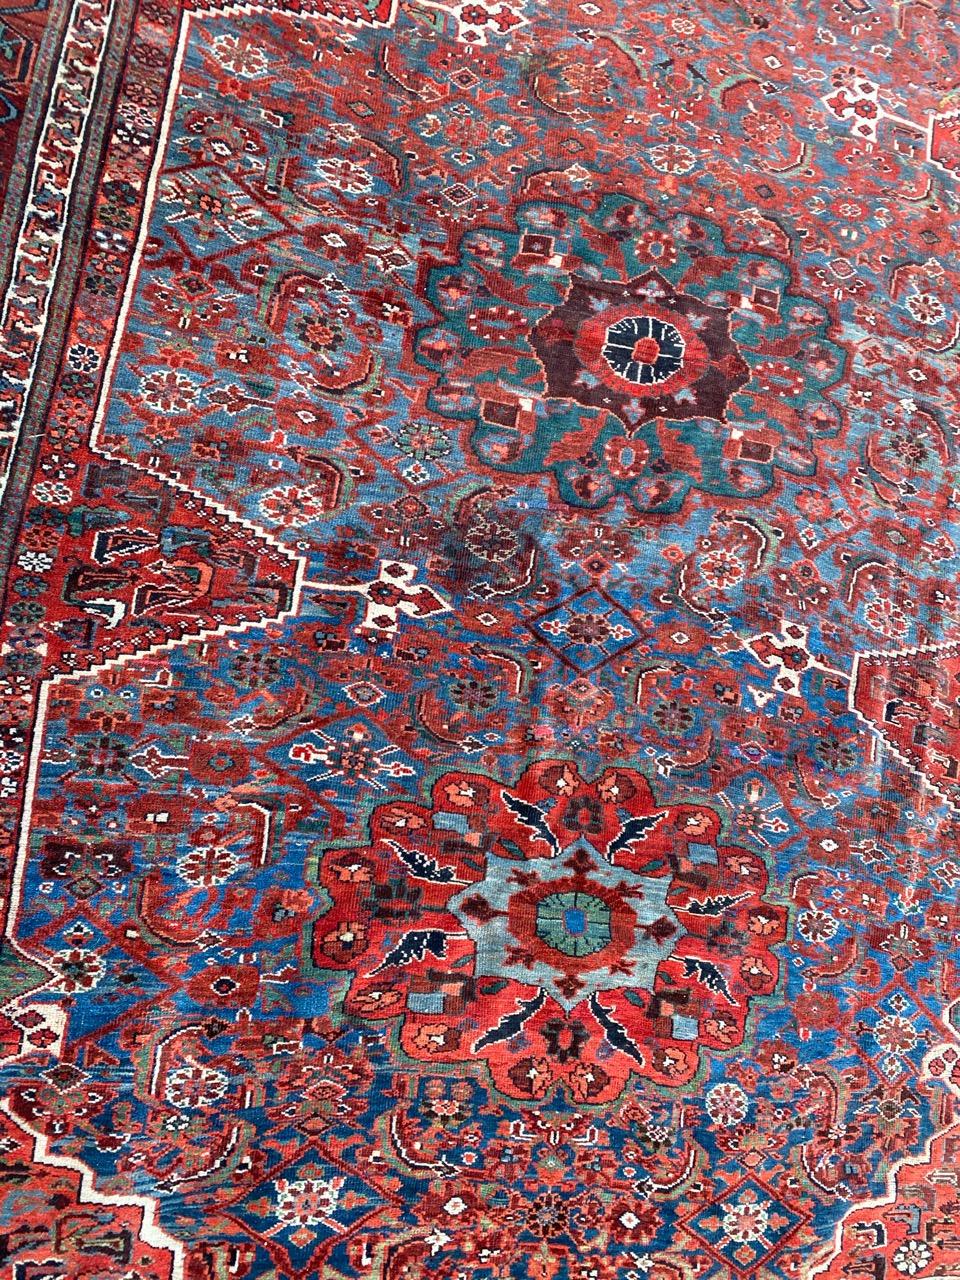 Discover the timeless elegance of a late 19th-century fine Afshar rug. Hand-knotted with meticulous craftsmanship, this masterpiece features a decorative design on a deep navy background. Stylized floral motifs in red, brown, green, orange, and